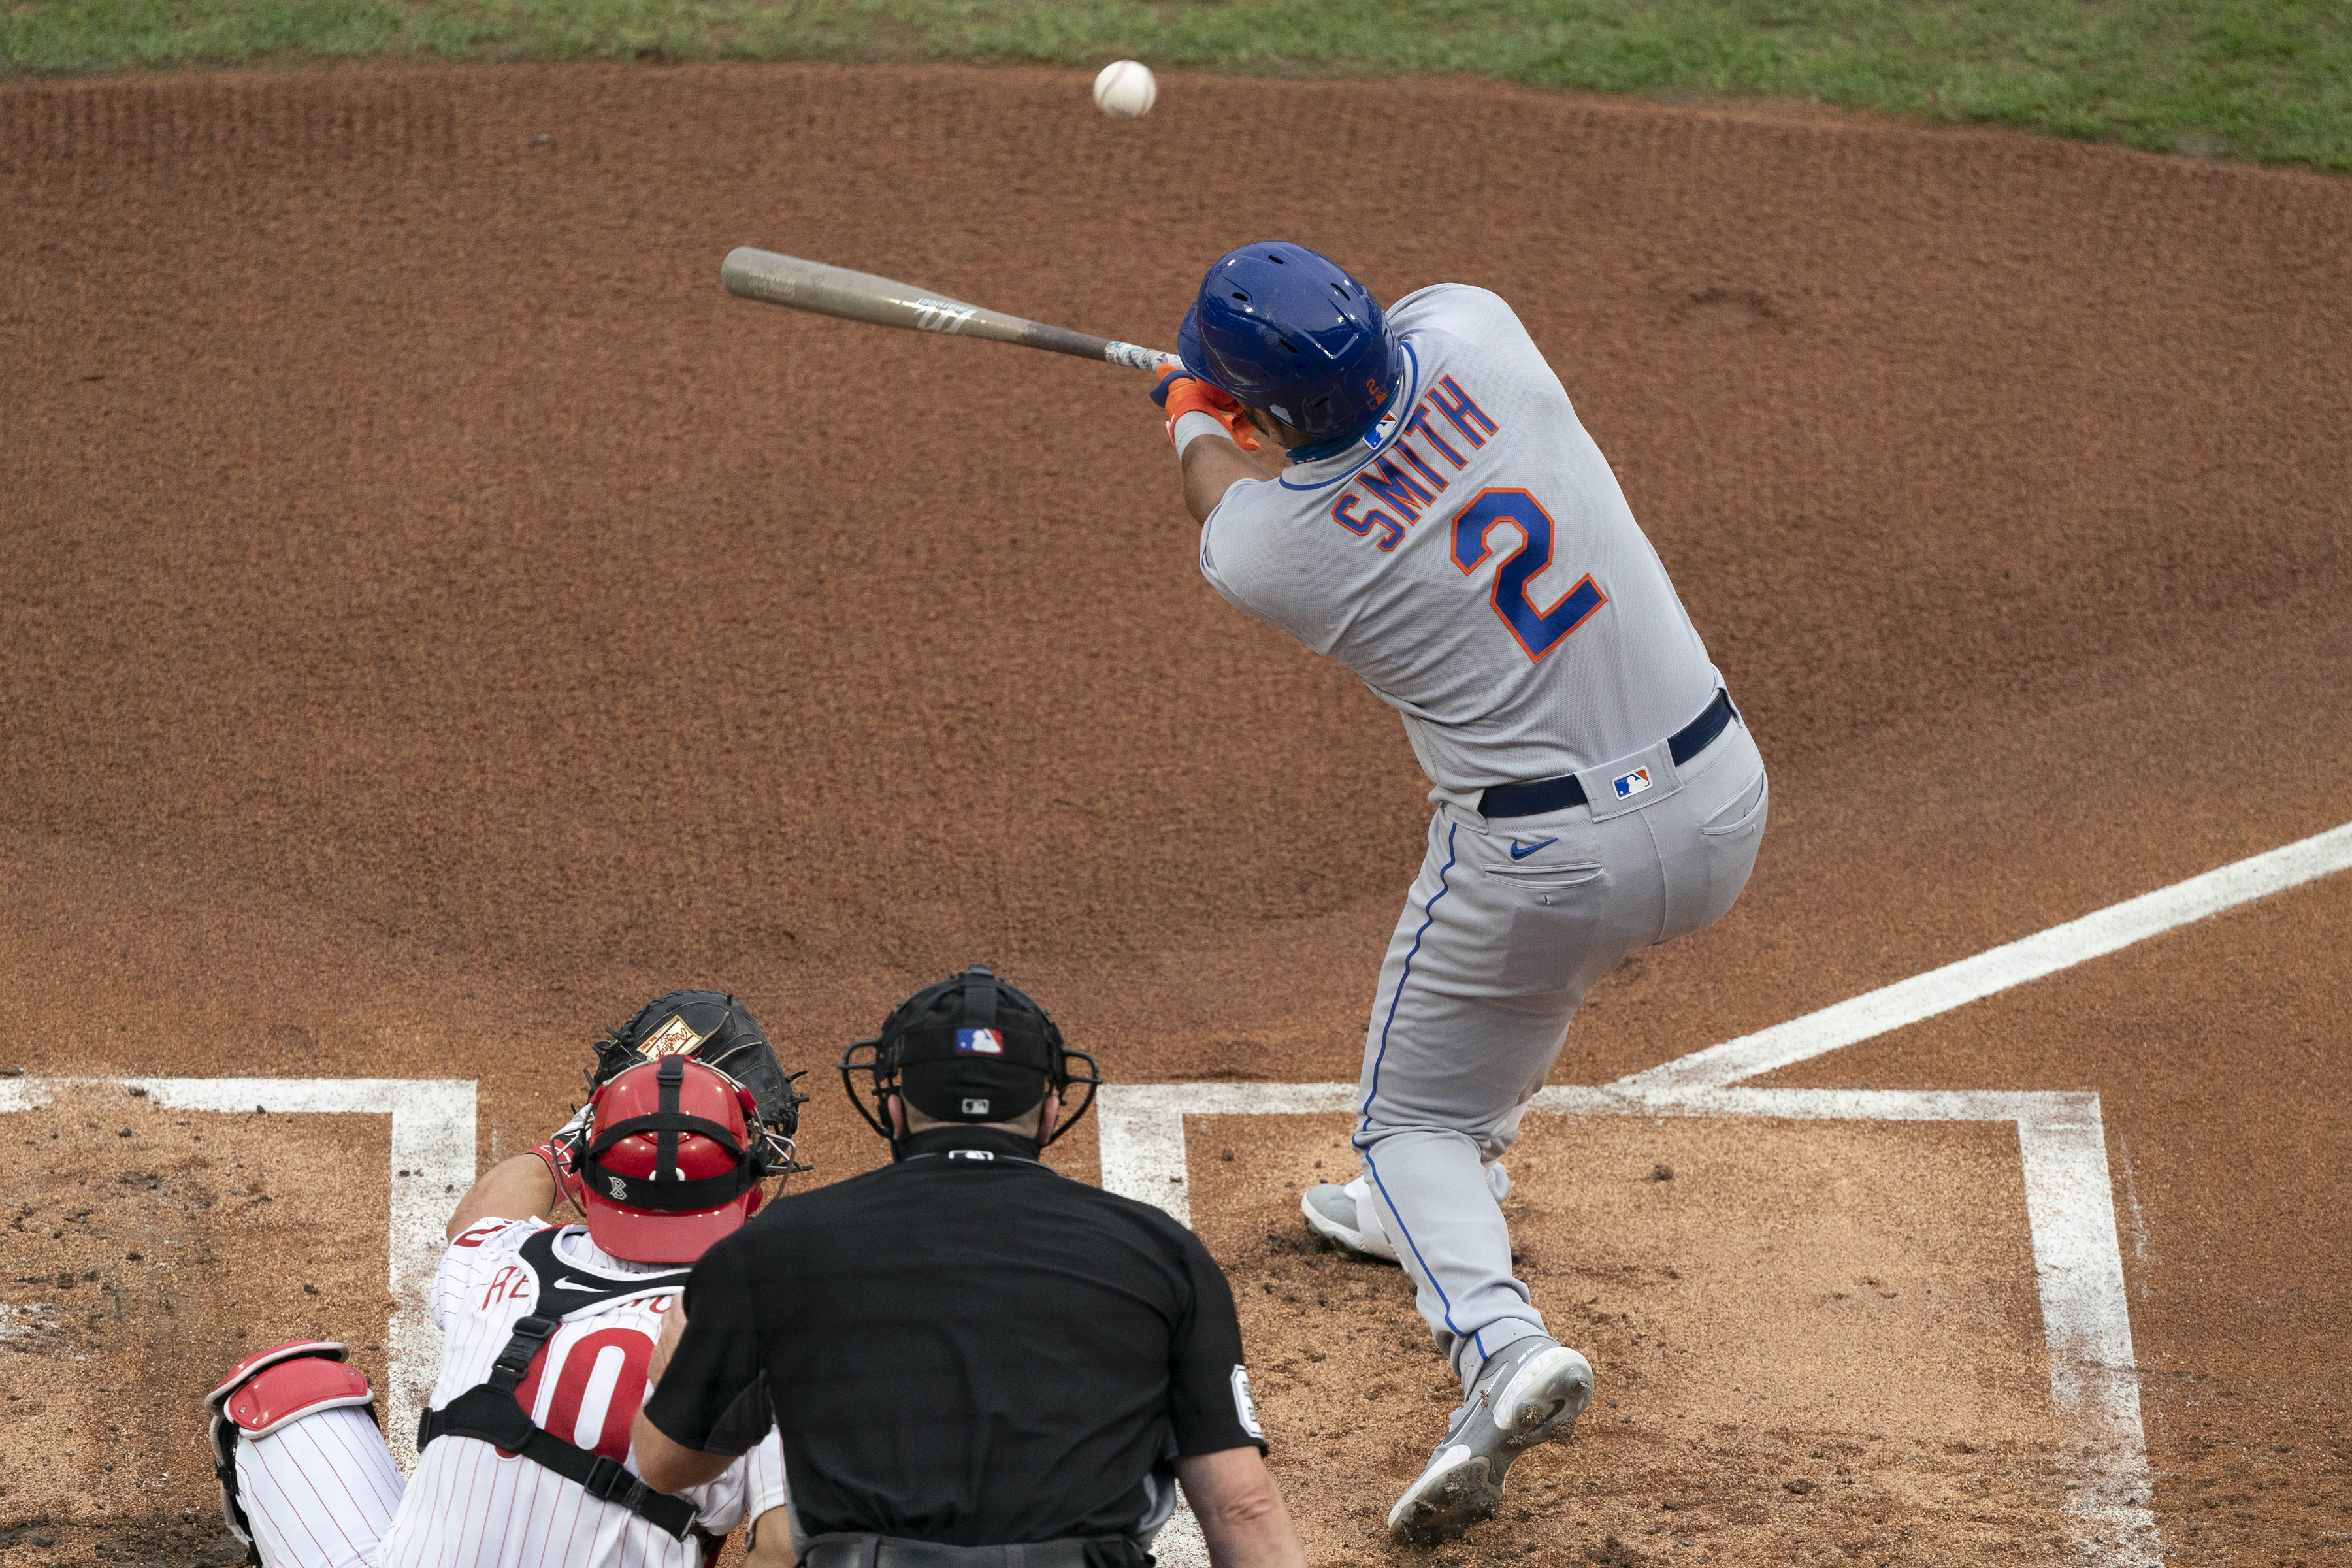 Mike's Met of the Month, July/August 2020: Dominic Smith